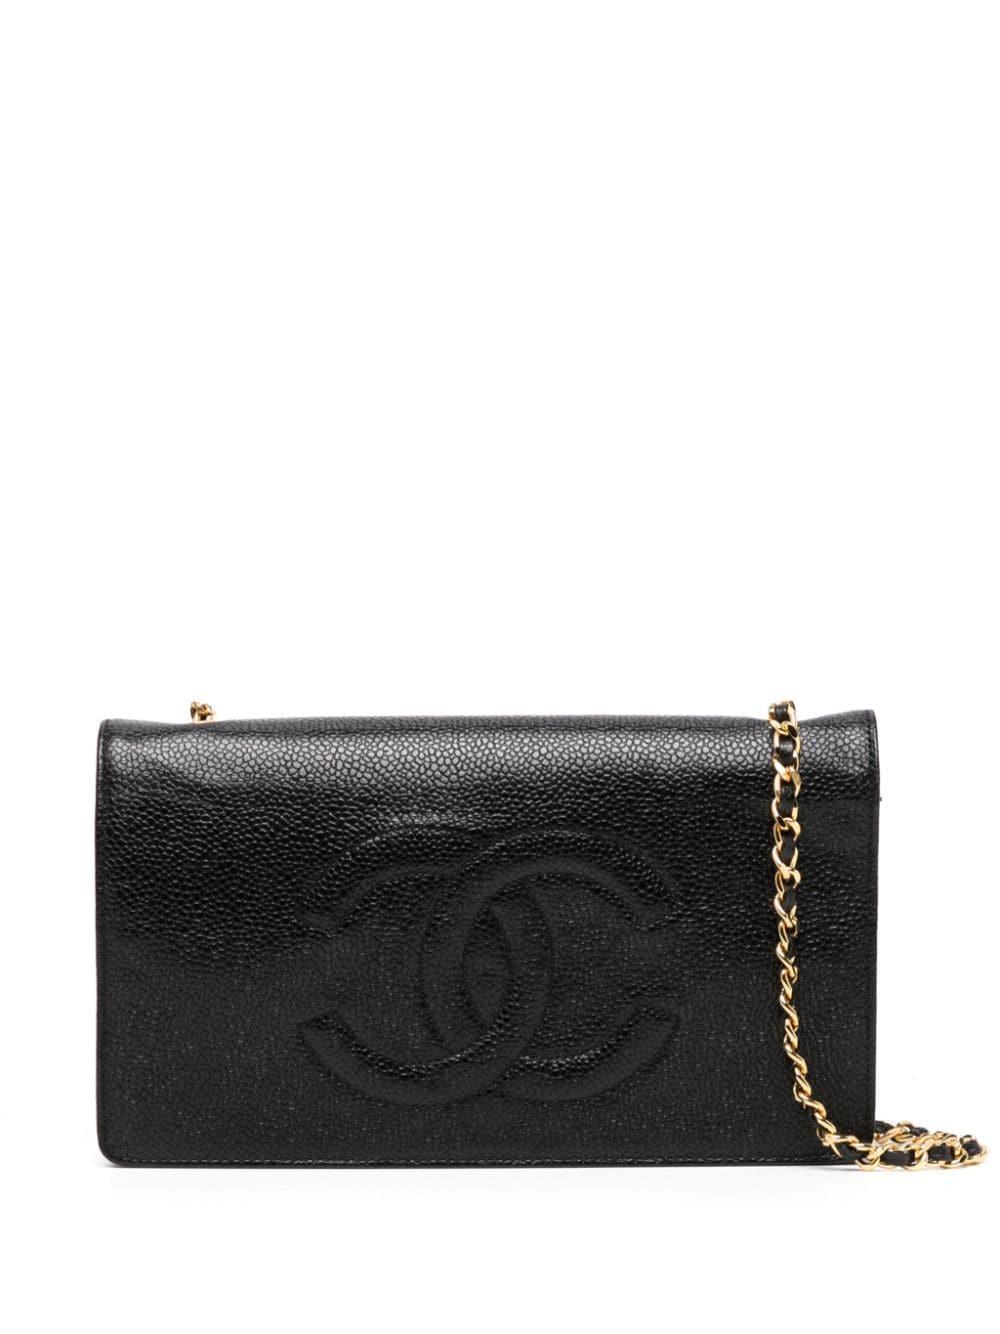 Chanel 1996 Vintage Woc Wallet On A Chain Black Calfskin Leather Cross Body Bag